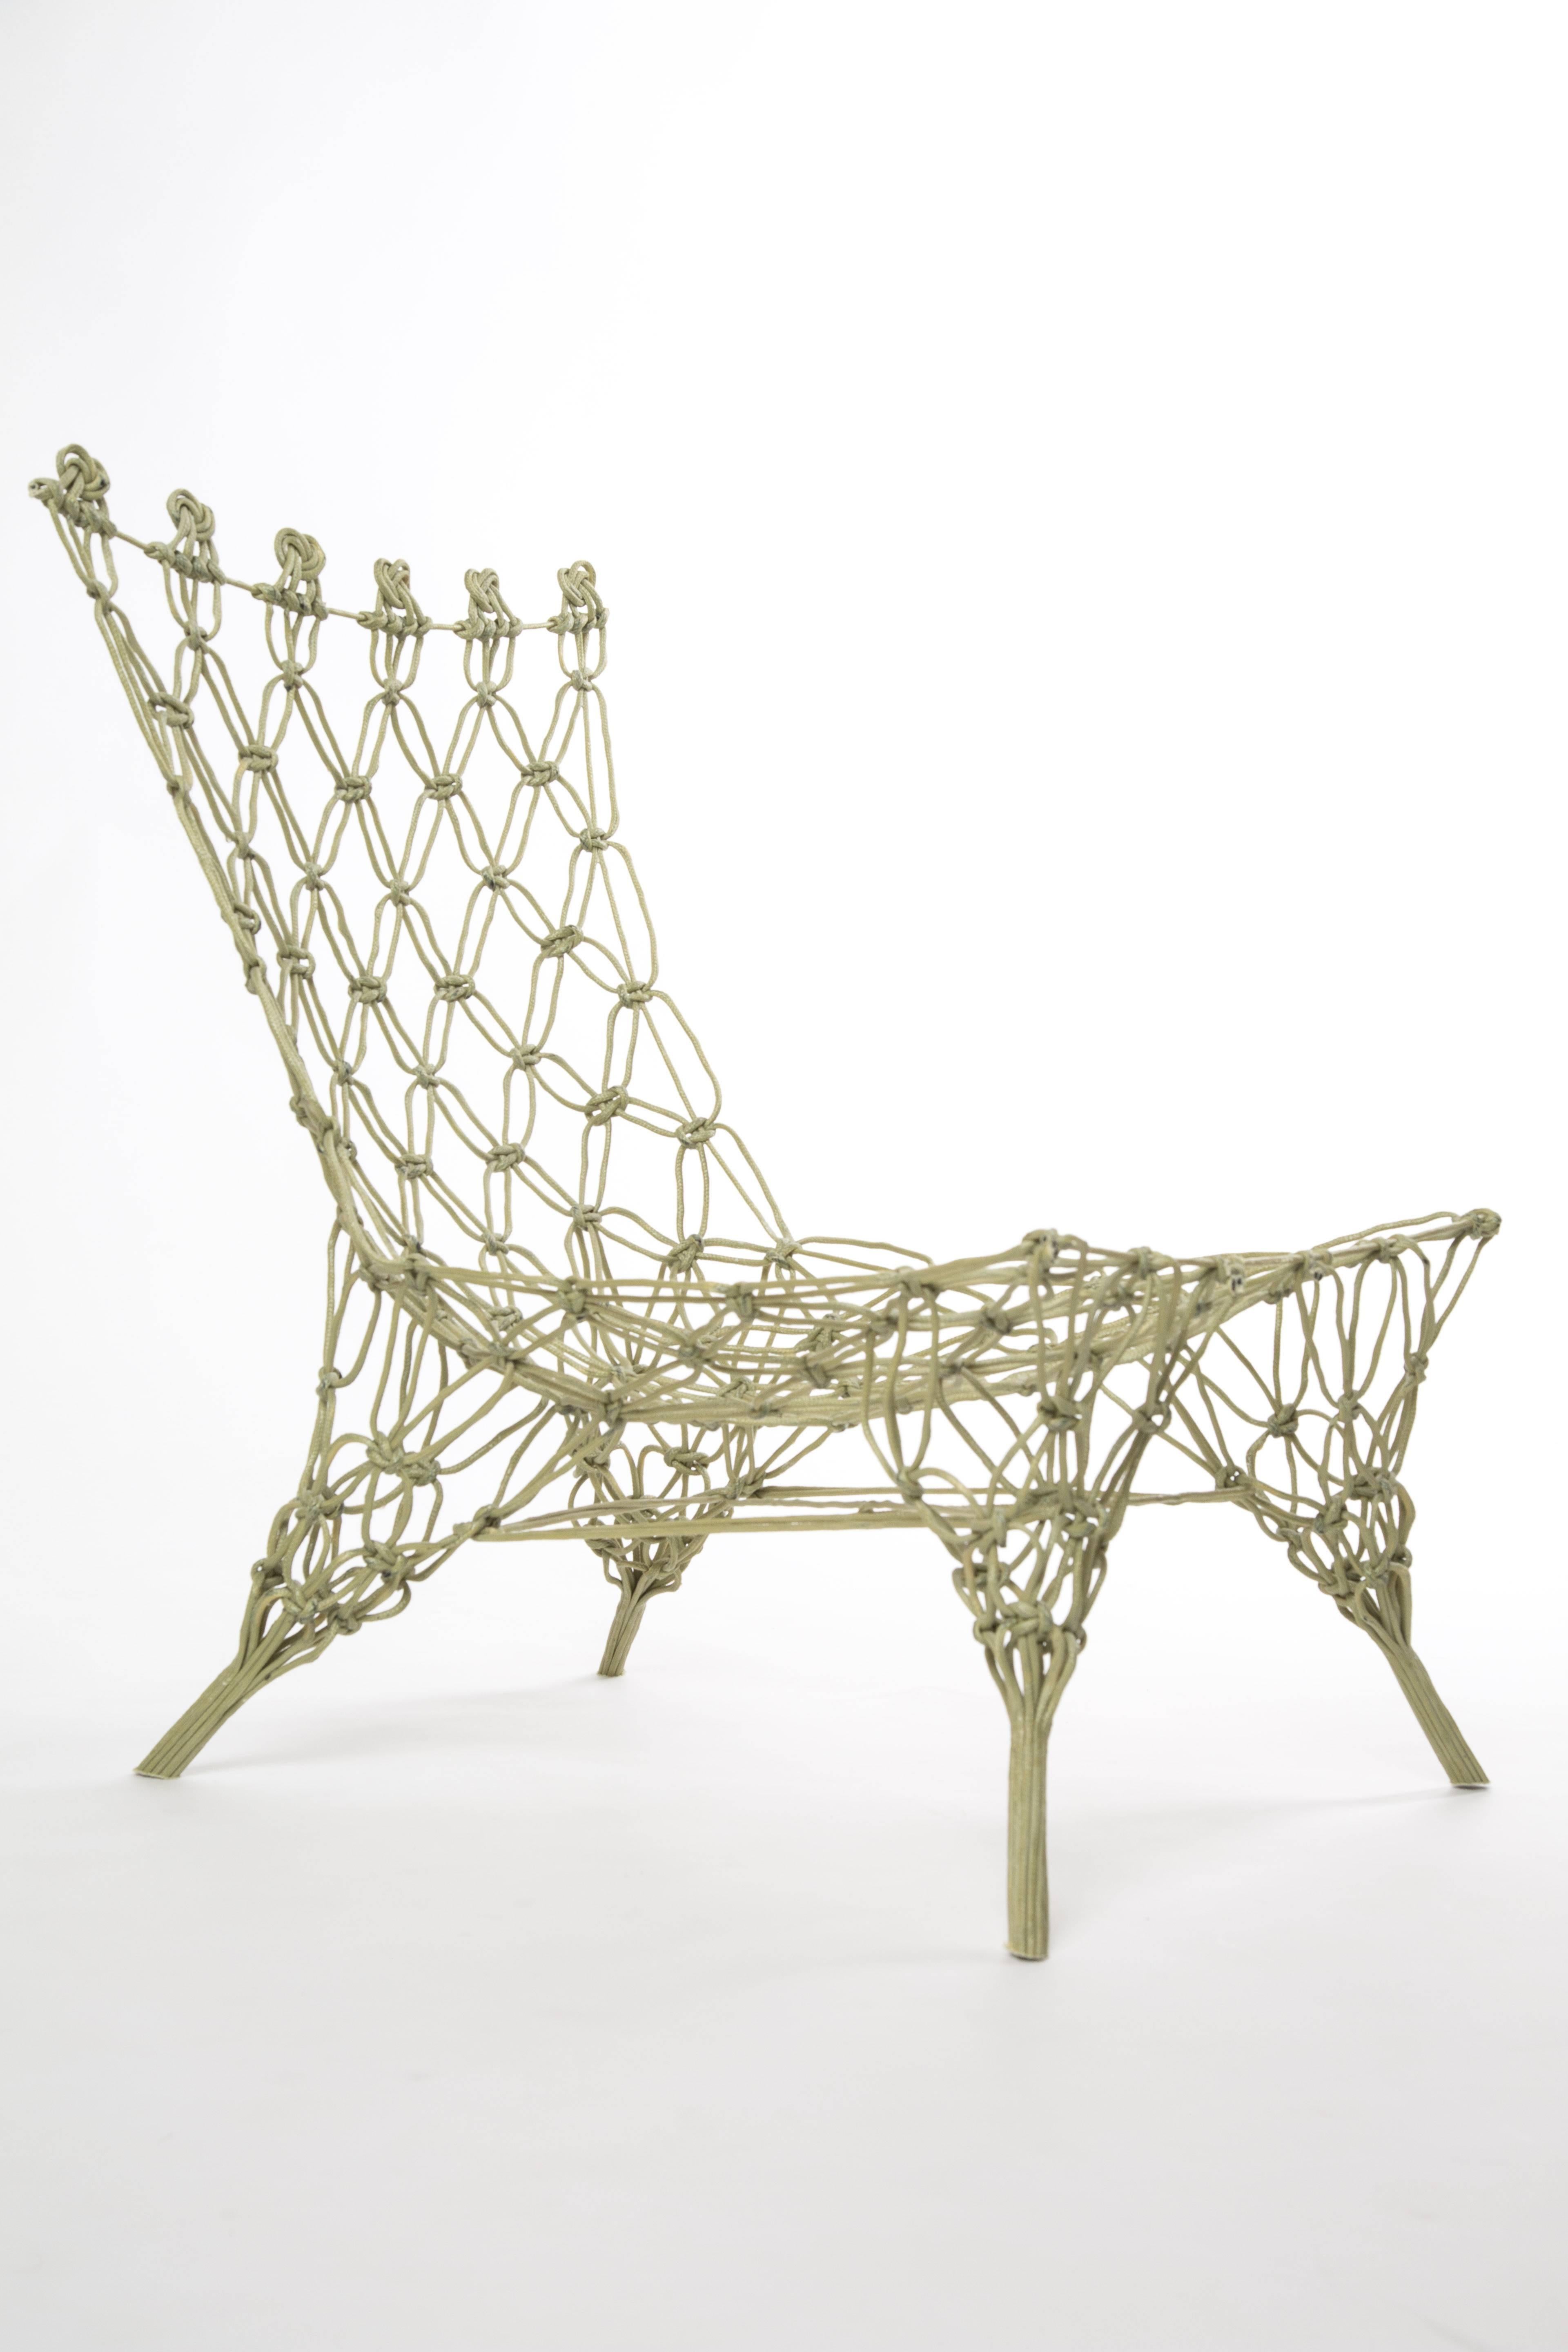 Hand-Knotted Knotted Chair Marcel Wanders for Droog Design, the Netherlands